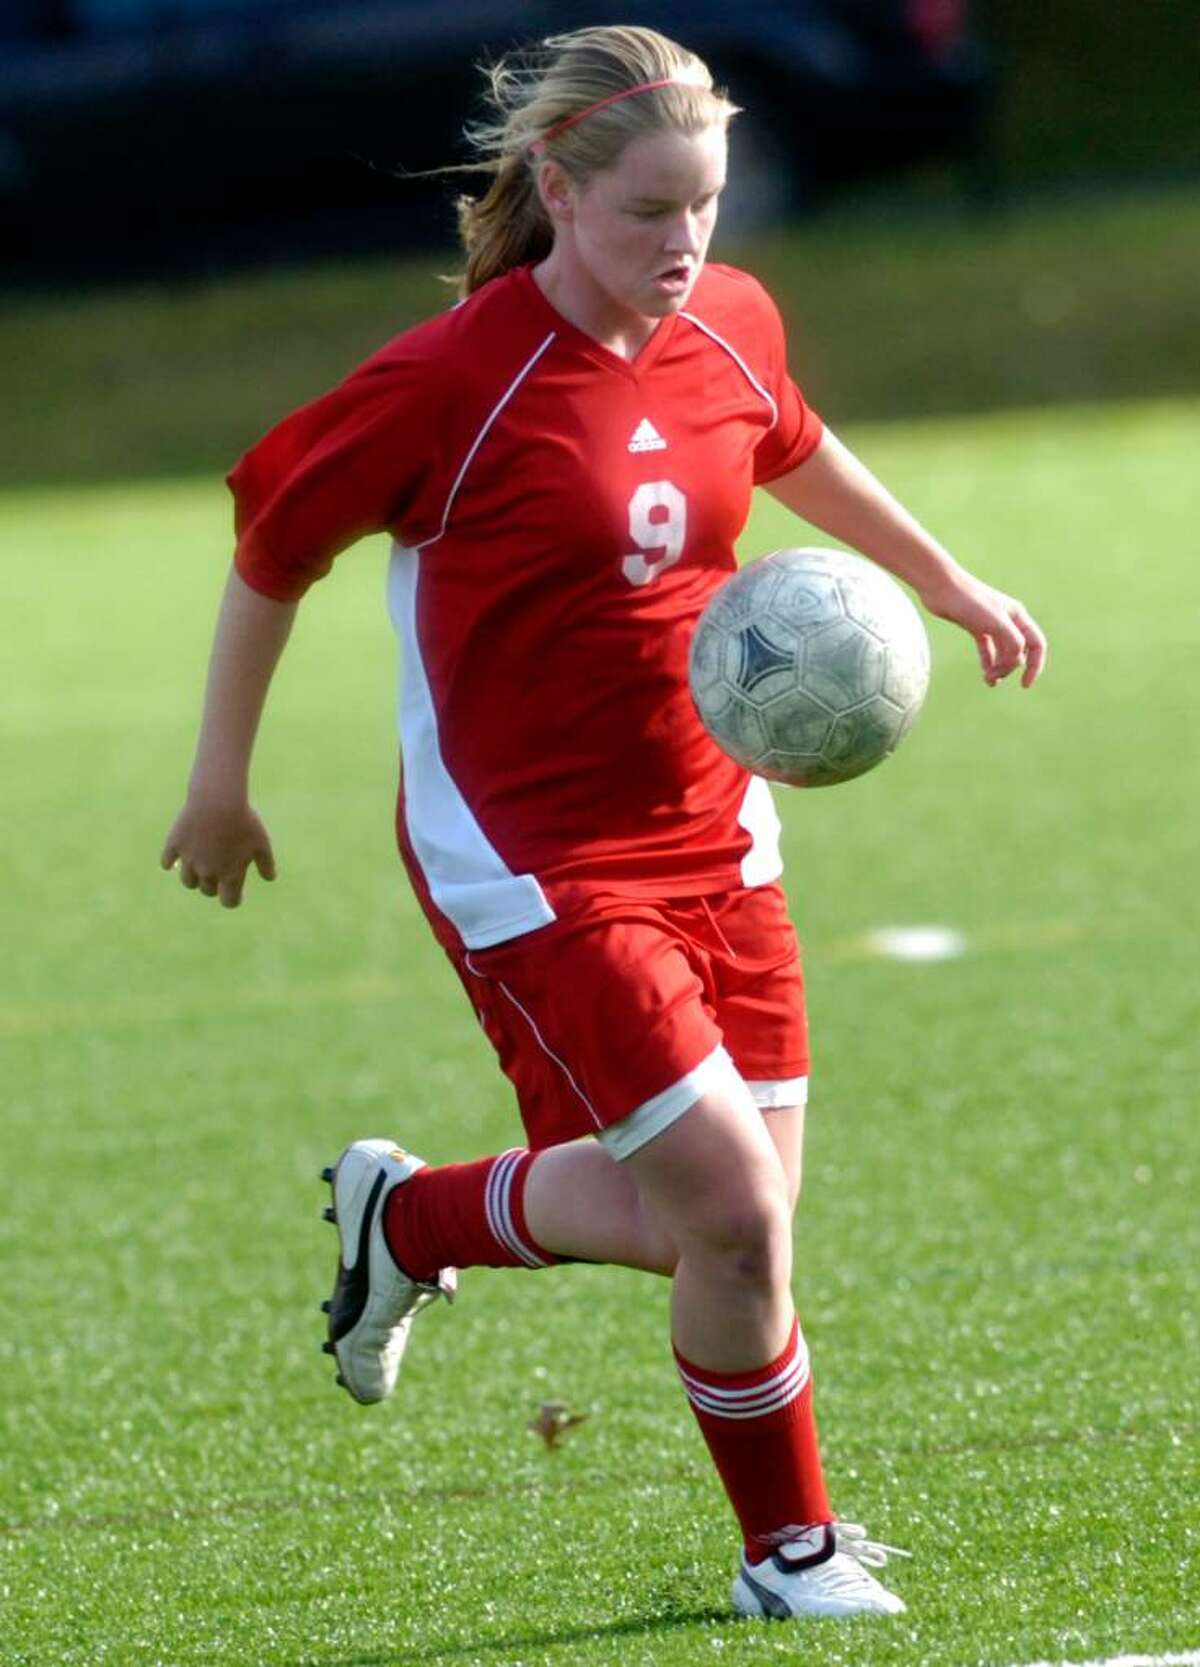 Greenwich's Shannon Colligan in action as Darien hosts Greenwich girls soccer on Wednesday afternoon, Oct. 7, 2009. Greenwich won 4-1.